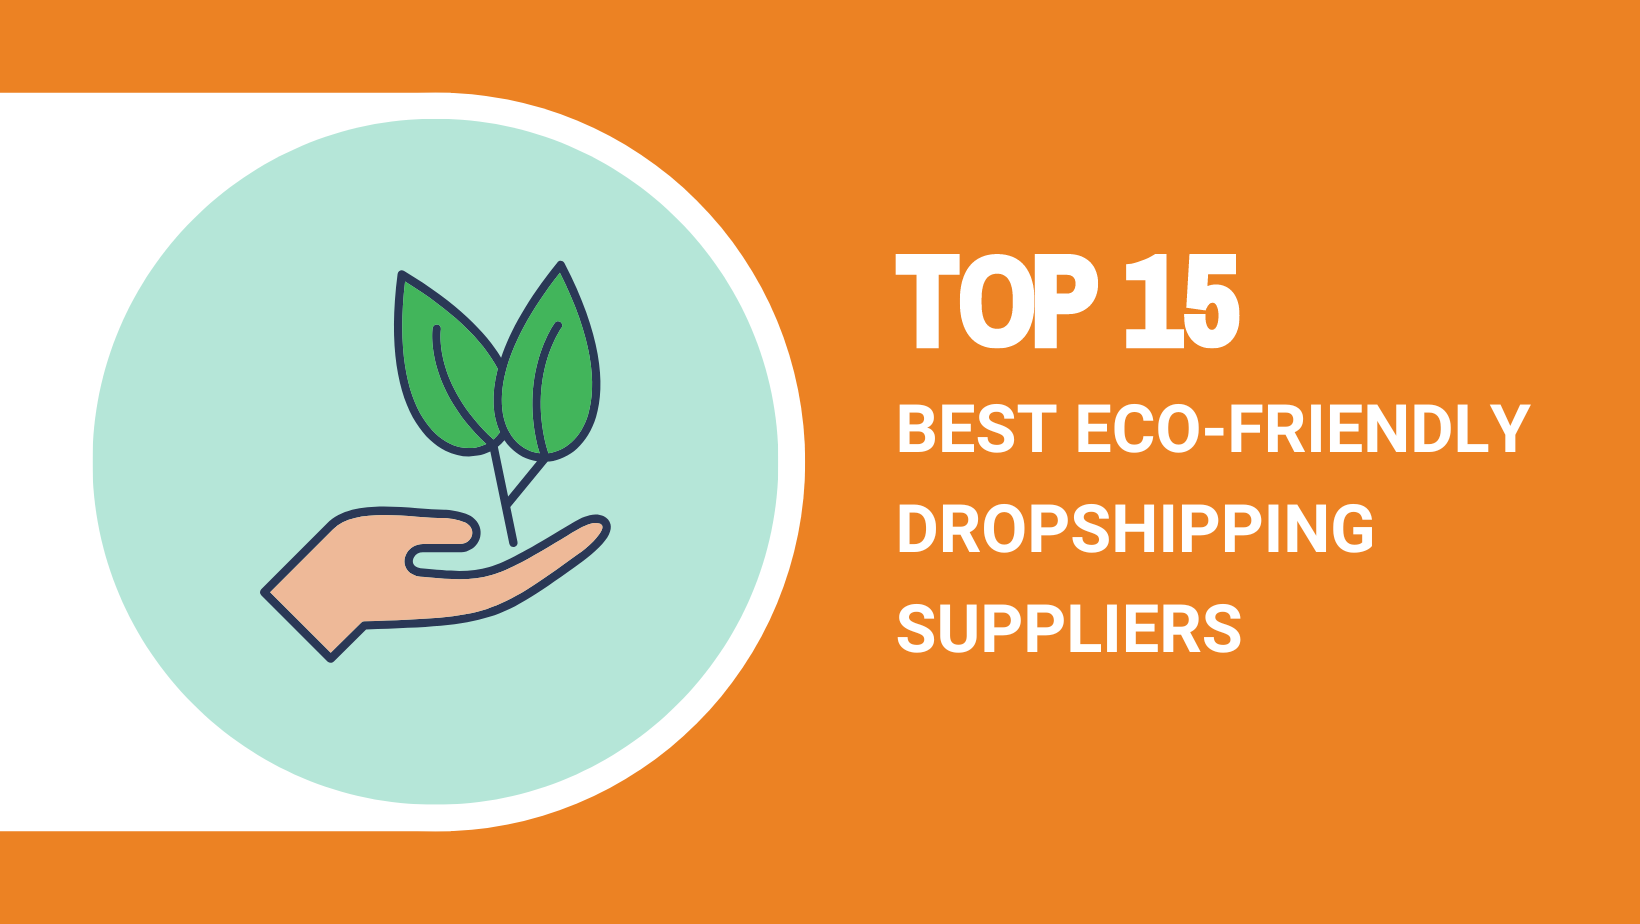 TOP 15 BEST ECO-FRIENDLY DROPSHIPPING SUPPLIERS